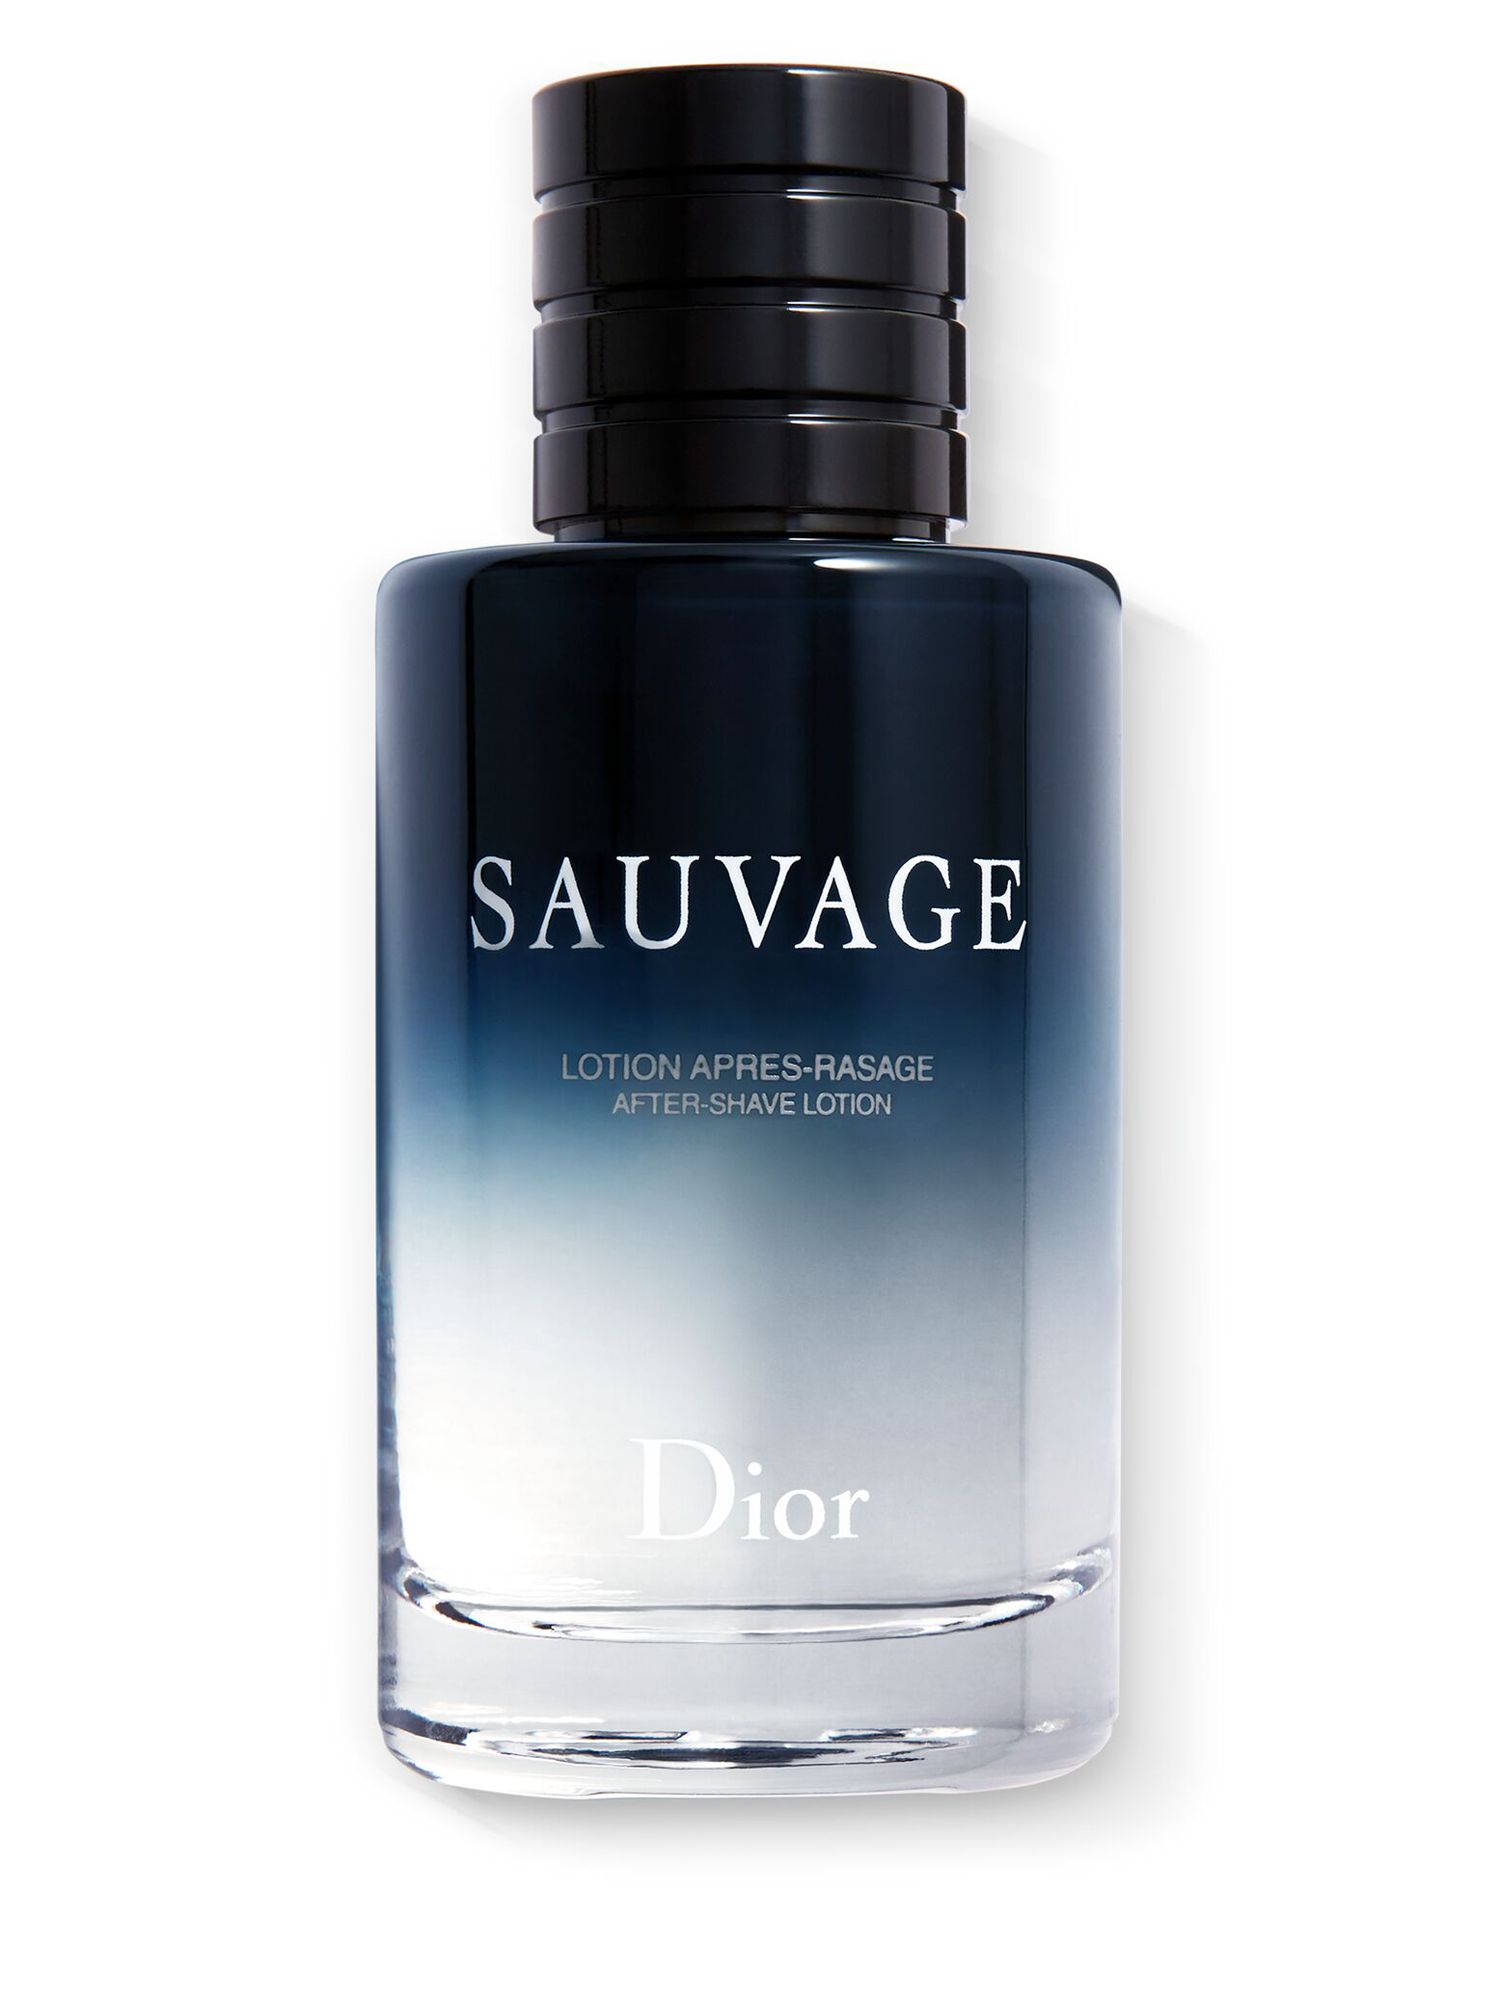 DIOR Sauvage Aftershave Lotion, 100ml at John Lewis & Partners